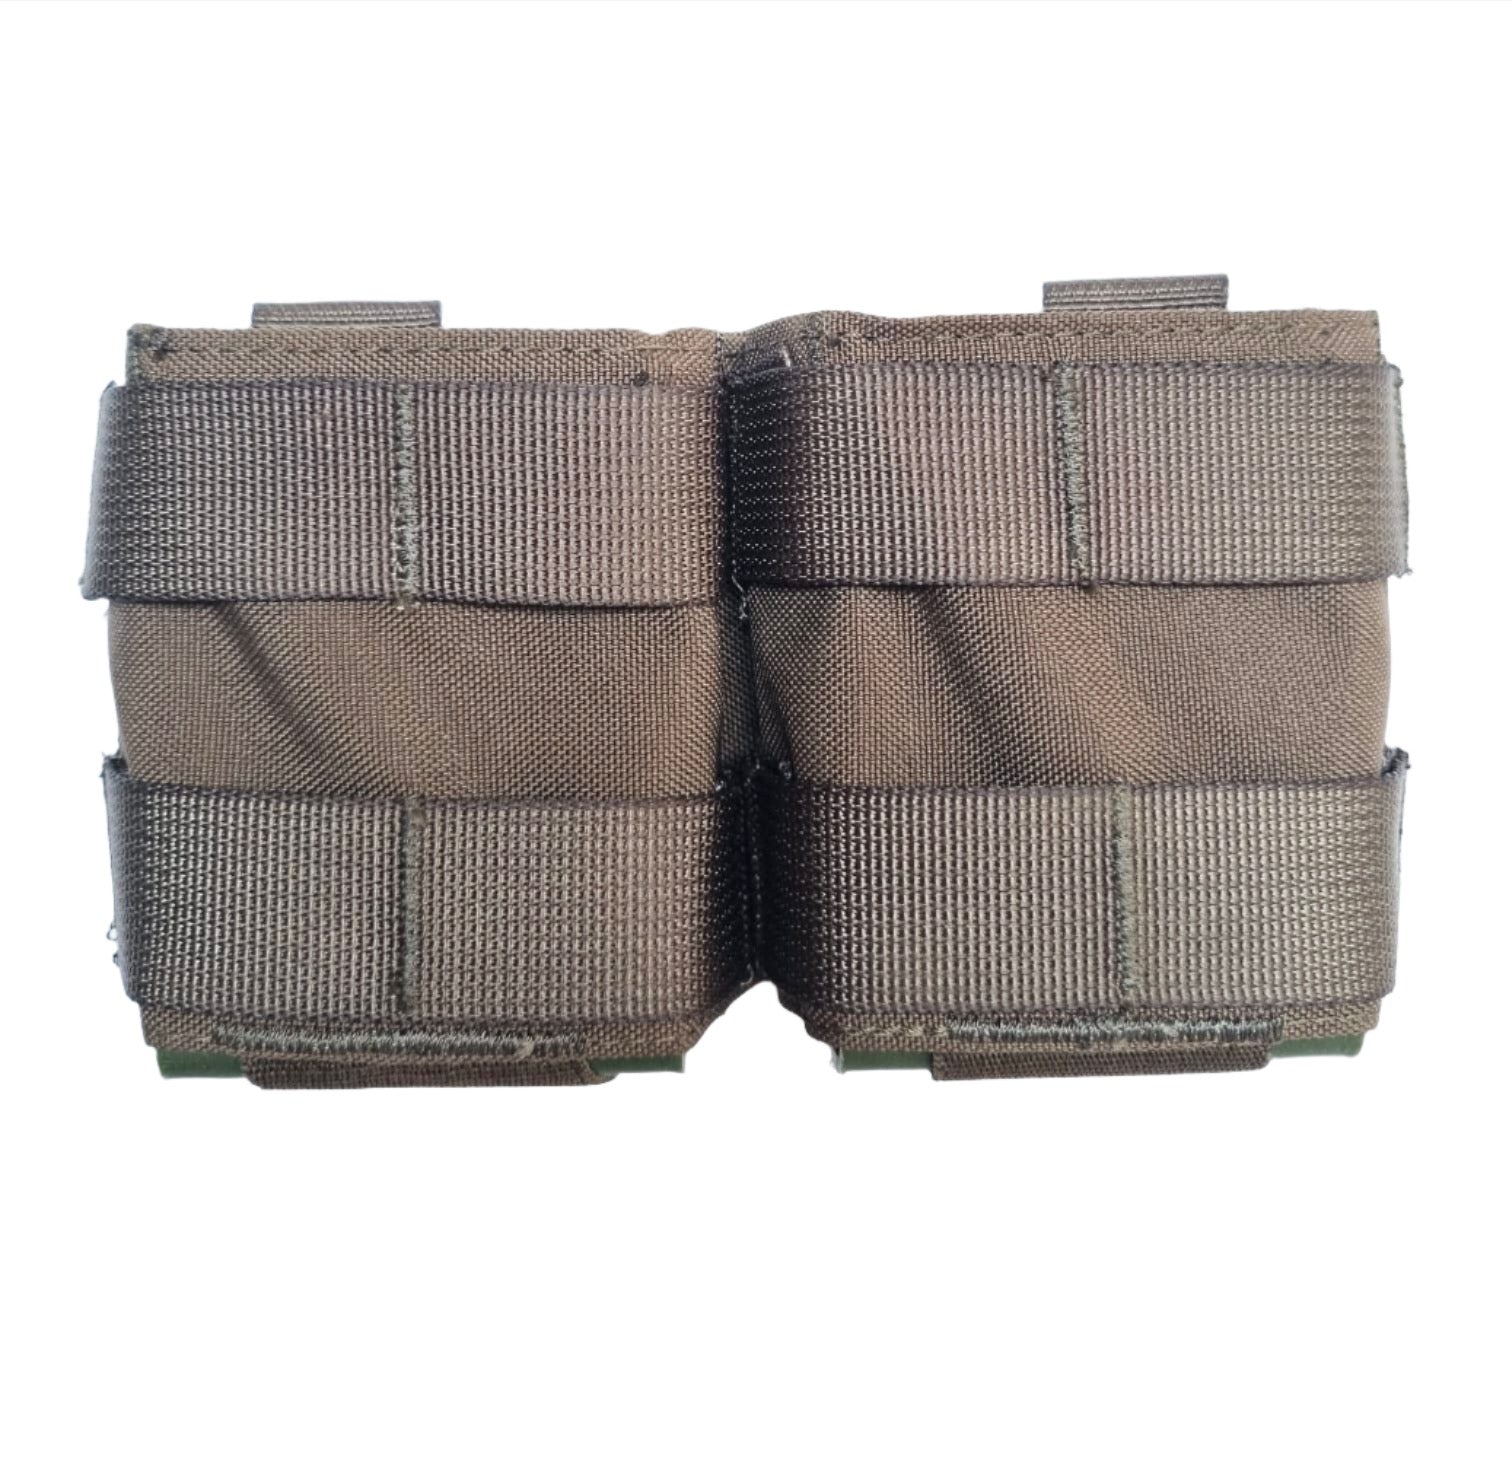 SHE-23032 GRIPTAC DOUBLE M4/M16 MAG POUCH RANGER GREEN